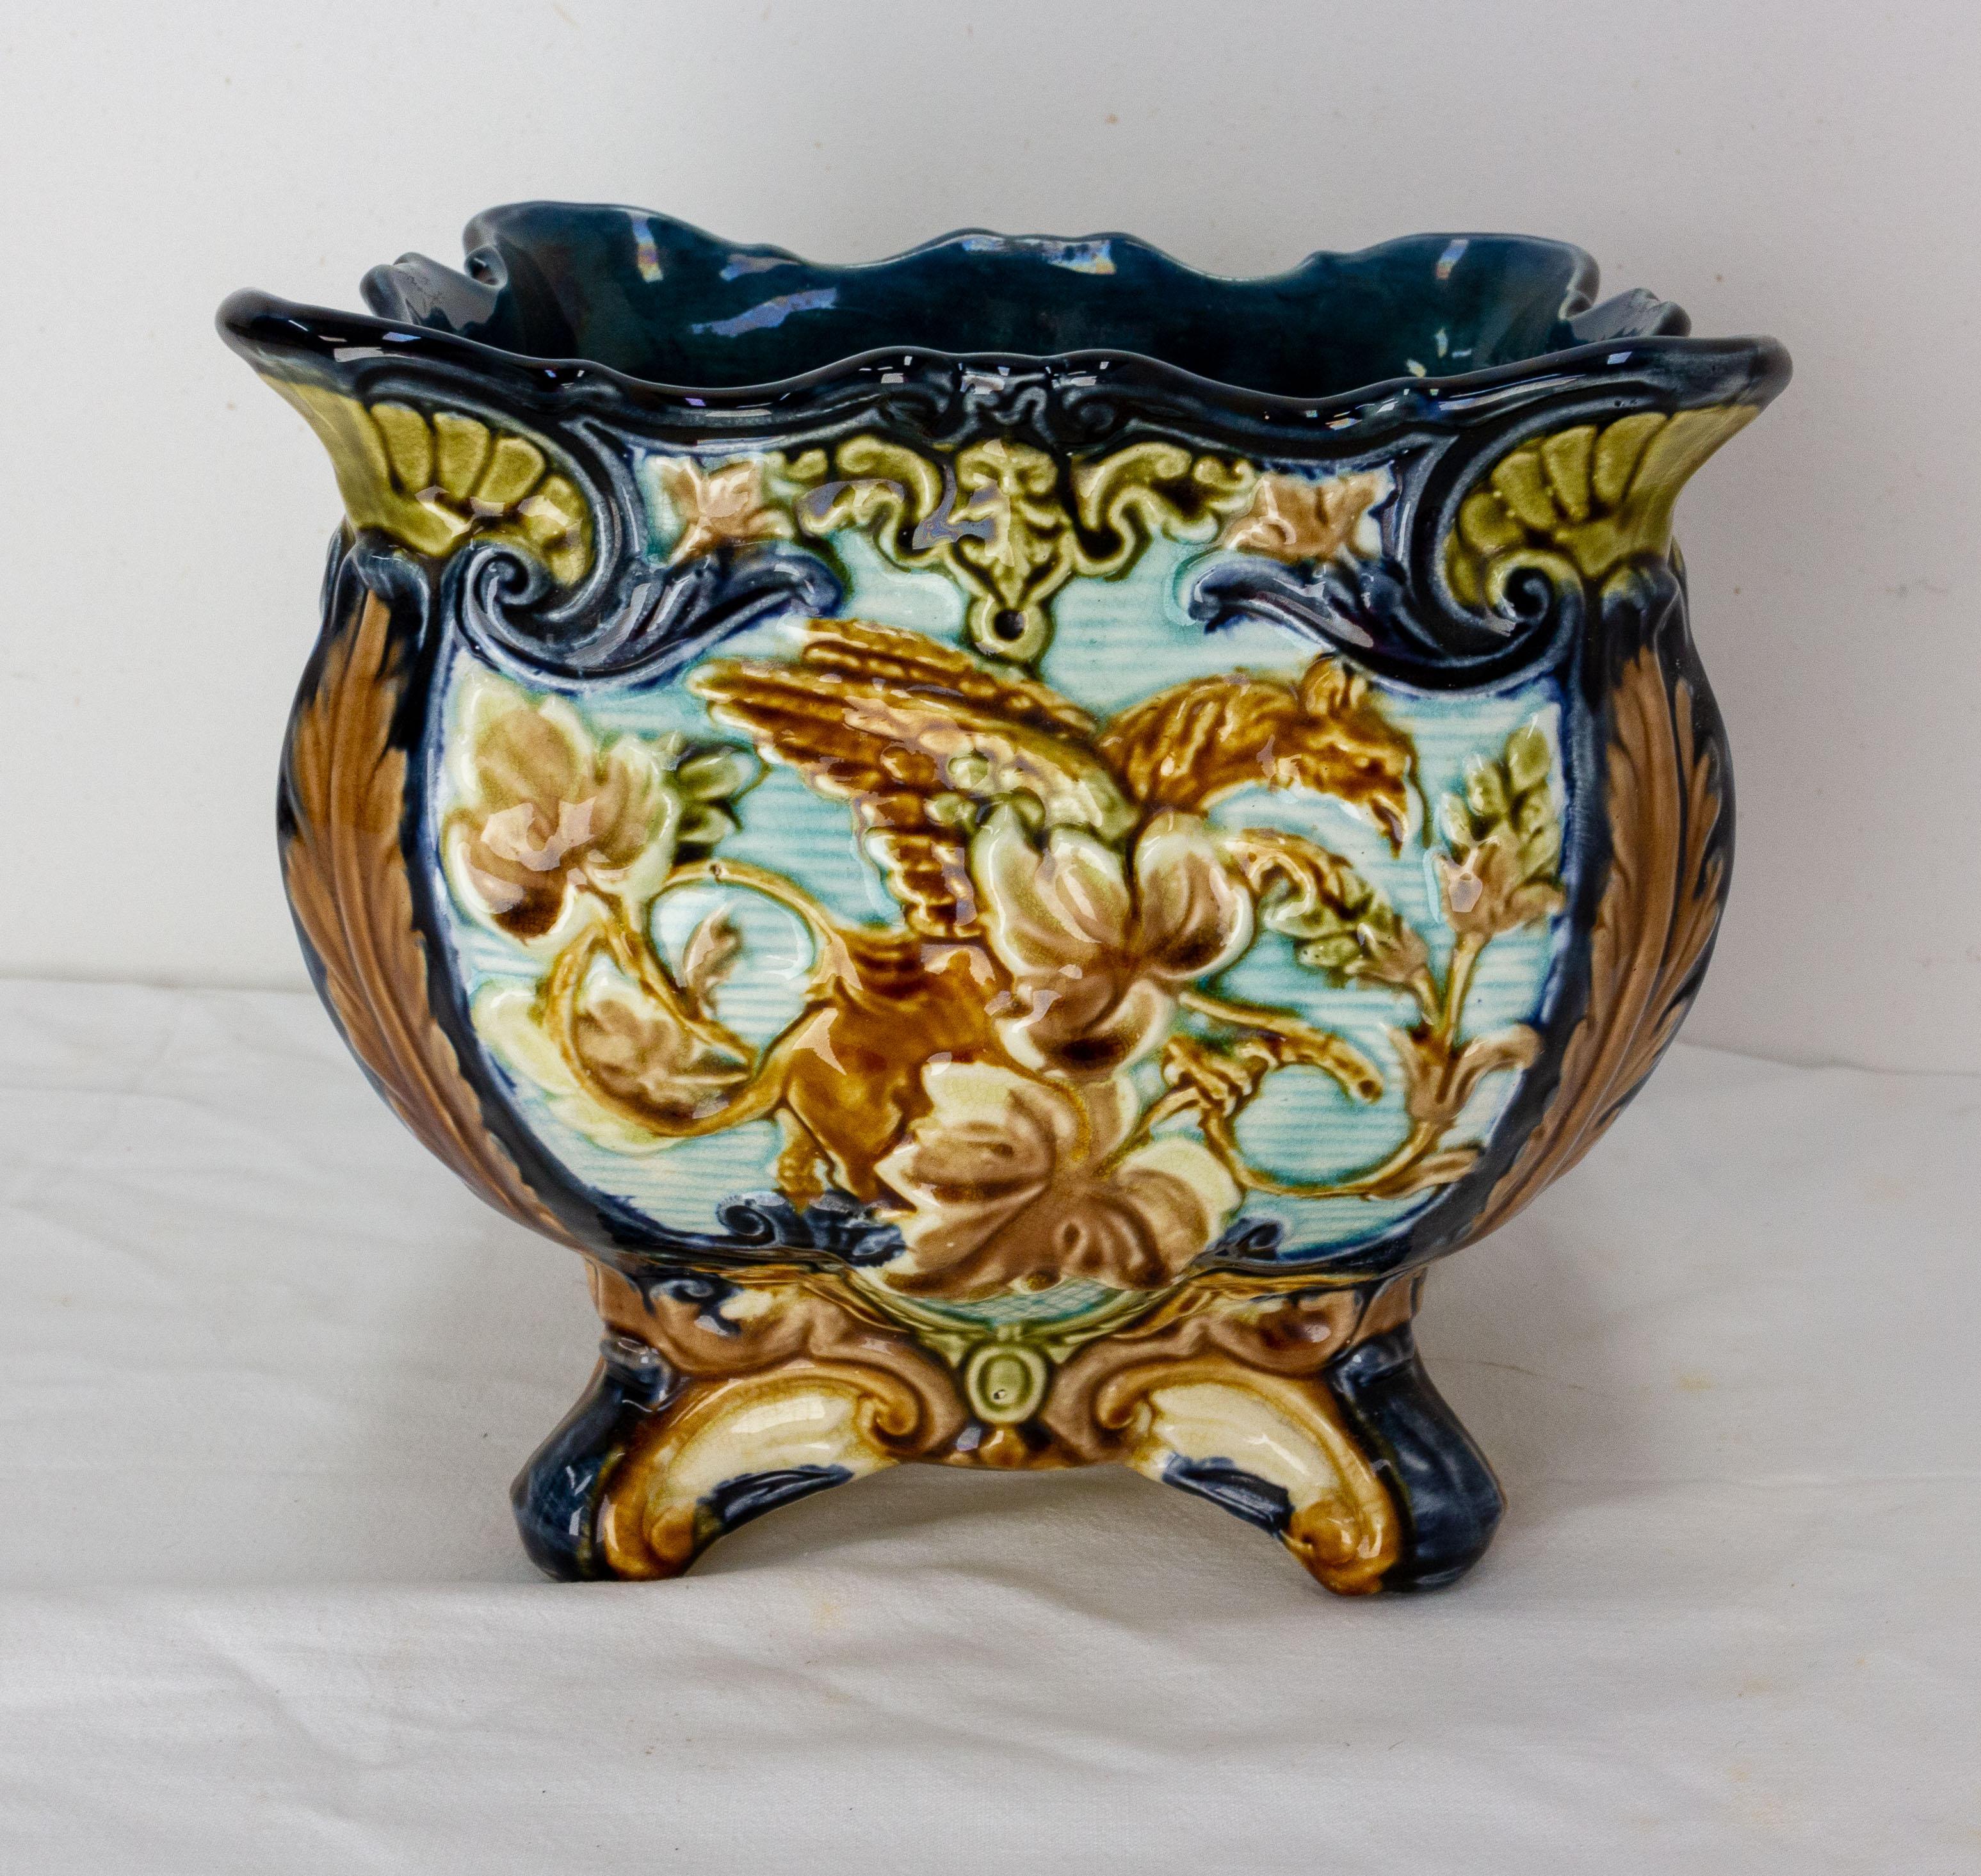 French square jardiniere with griffins and vegetal decoration, circa 1900.
Art nouveau
Very good condition.

